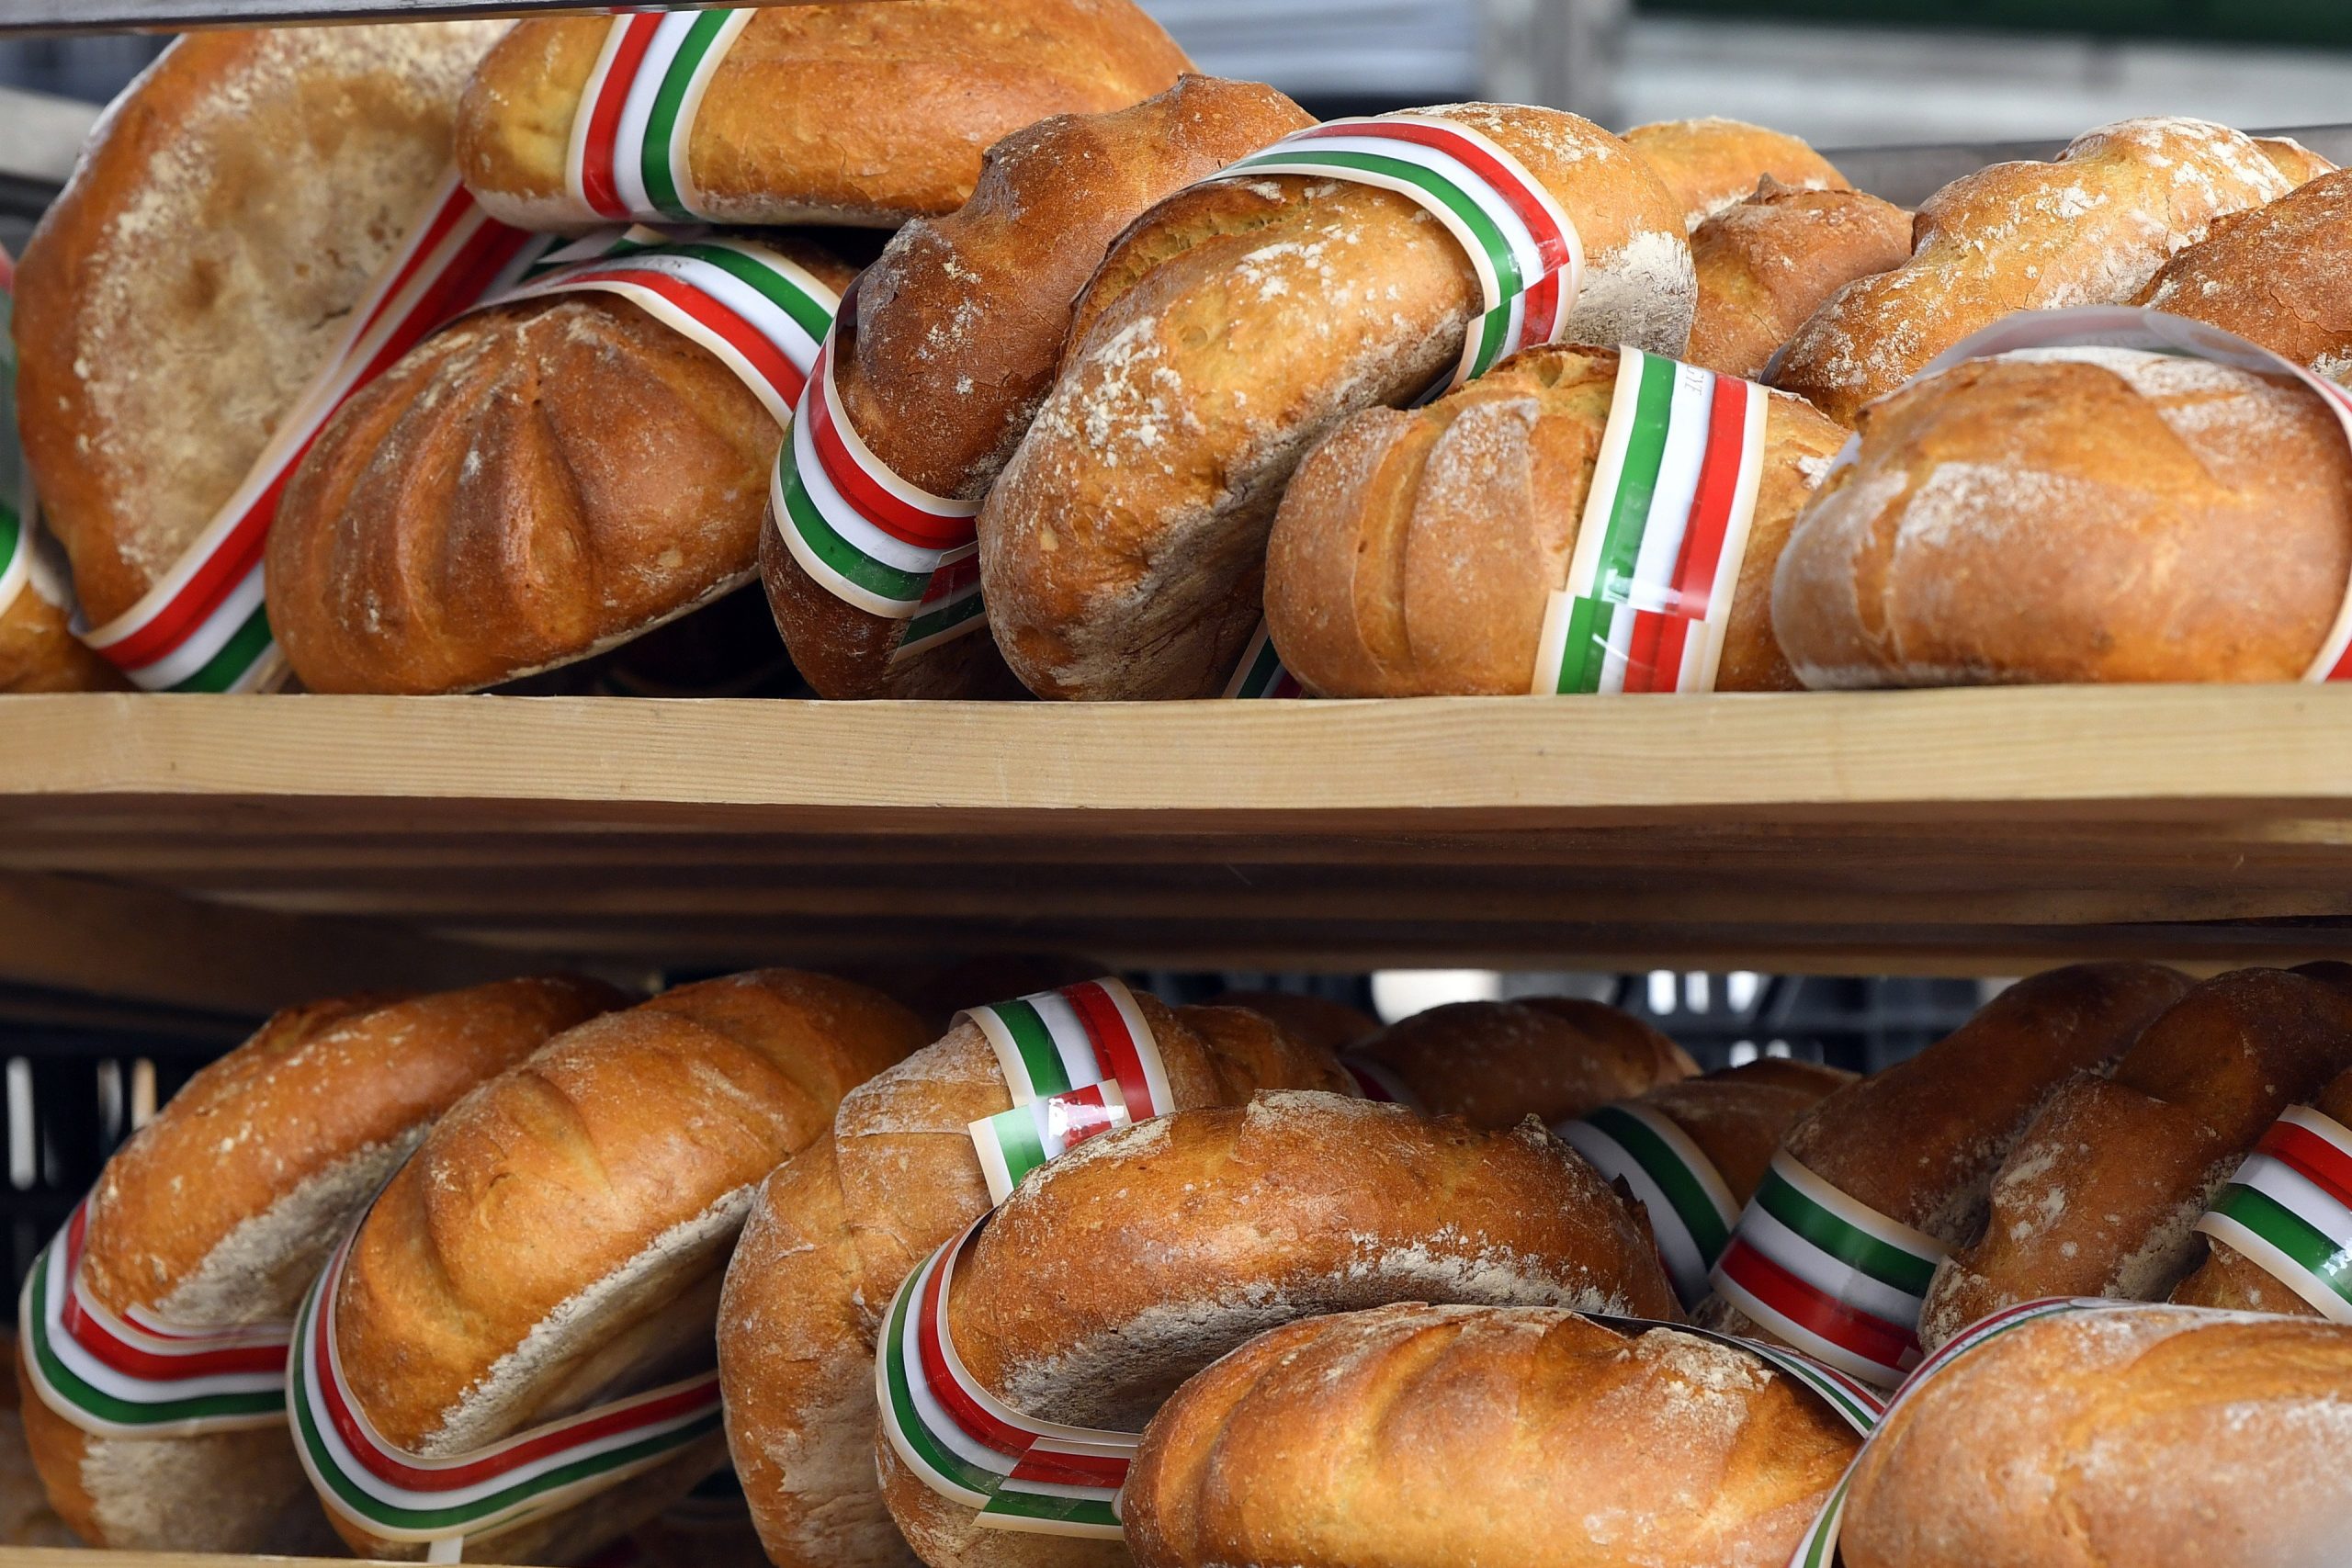 The price of bread in Hungary could exceed €2 per kilo by summer